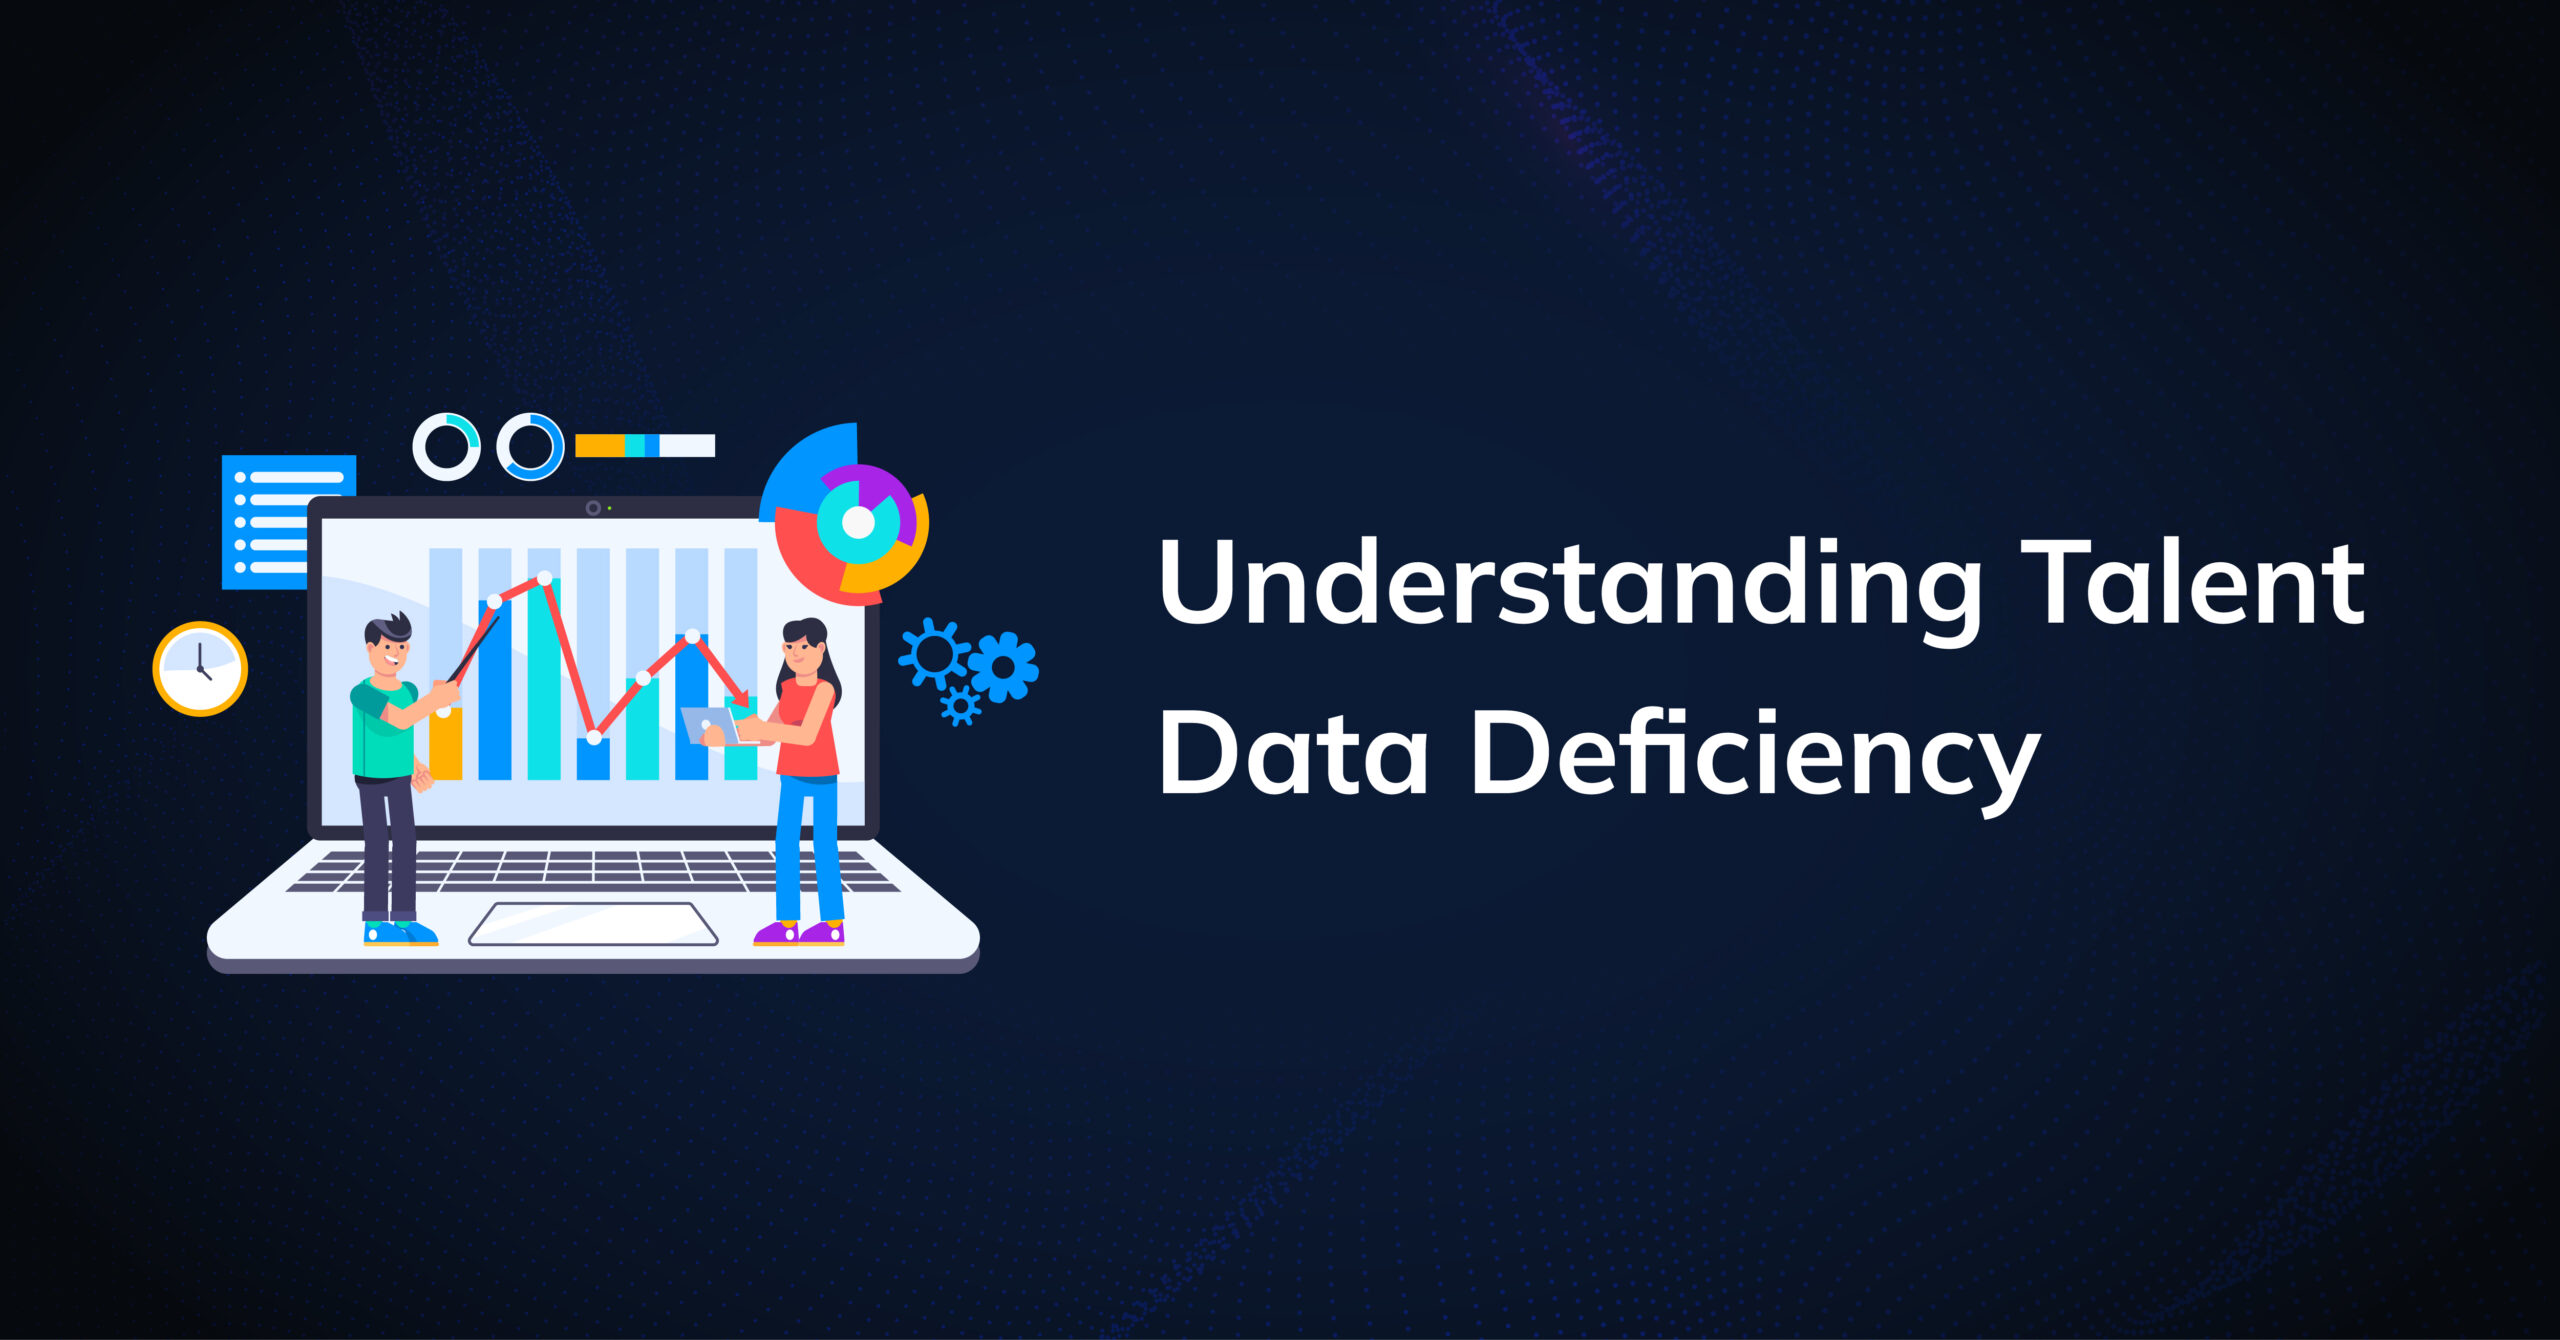 Understanding Talent Data Deficiency: Causes and Consequences